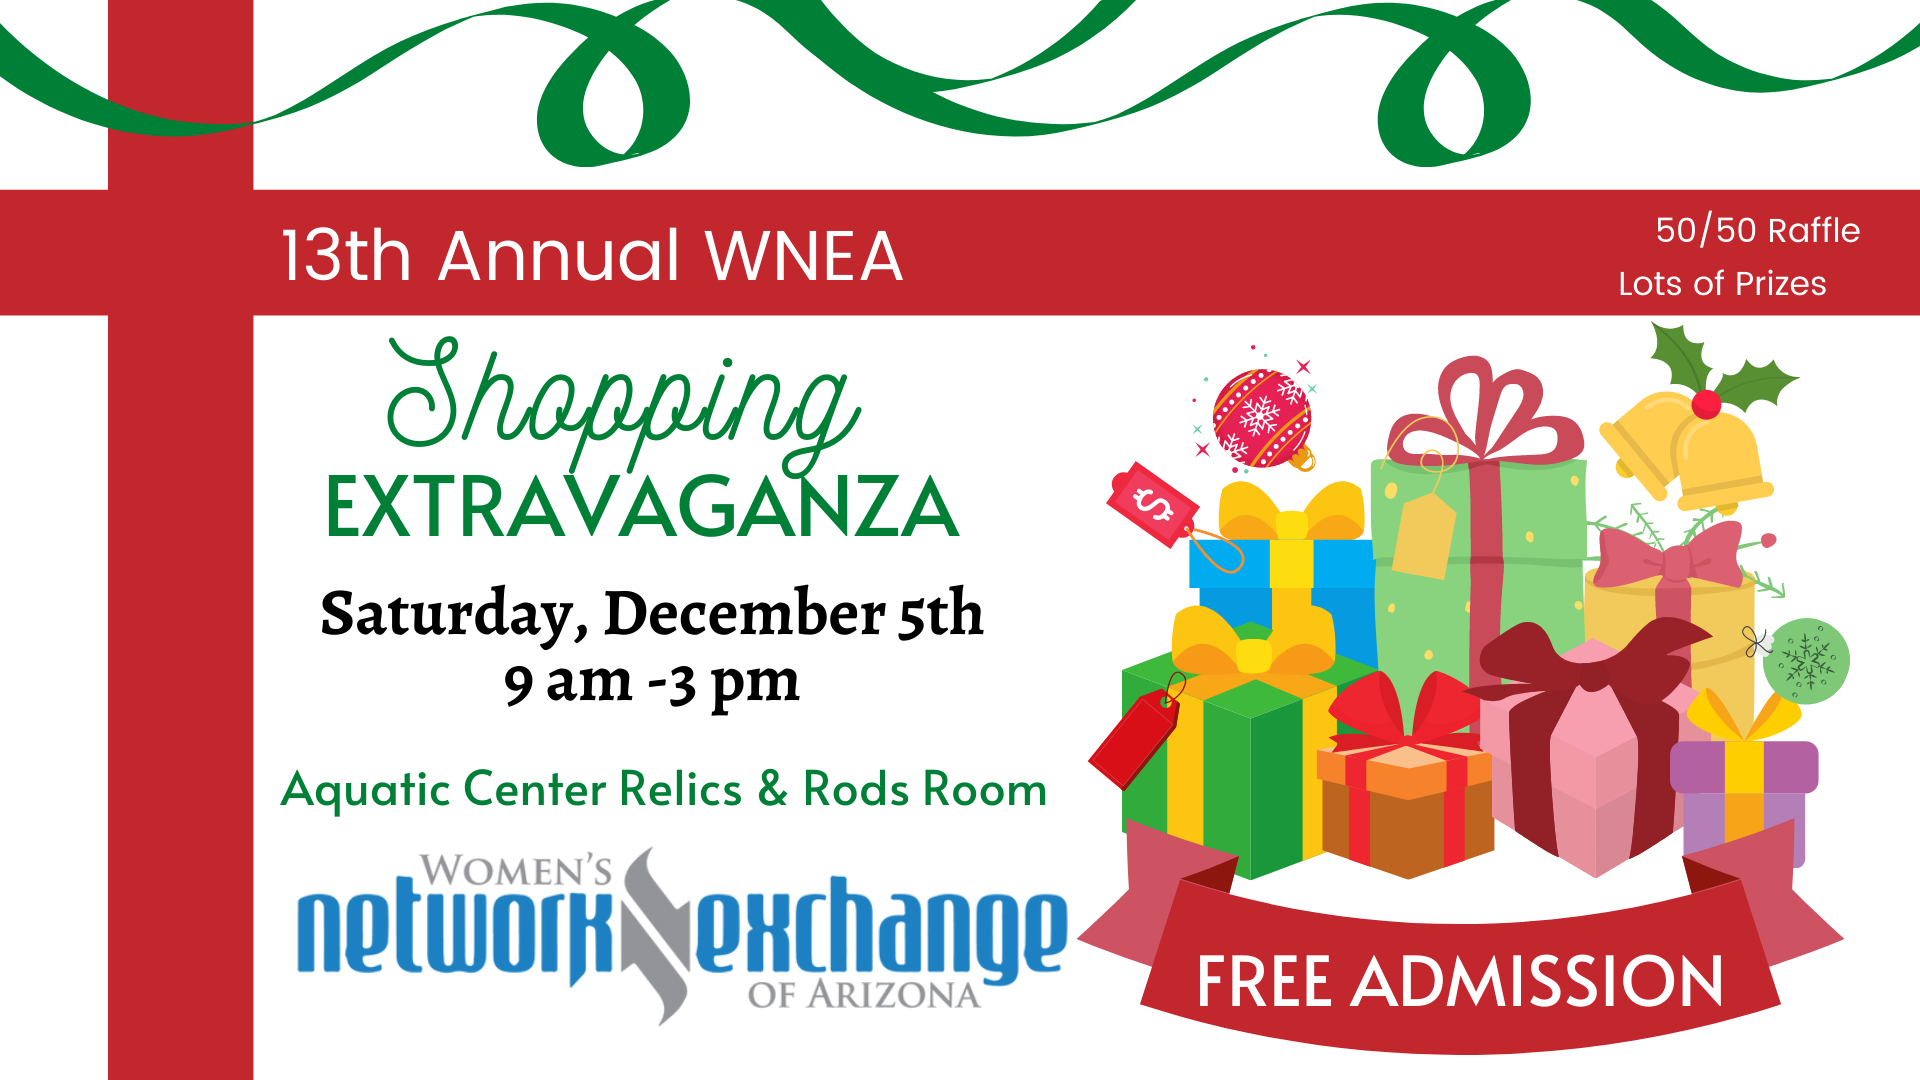 Women’s Network Exchange of Arizona 13th Annual Shopping Extravaganza is cancelled.